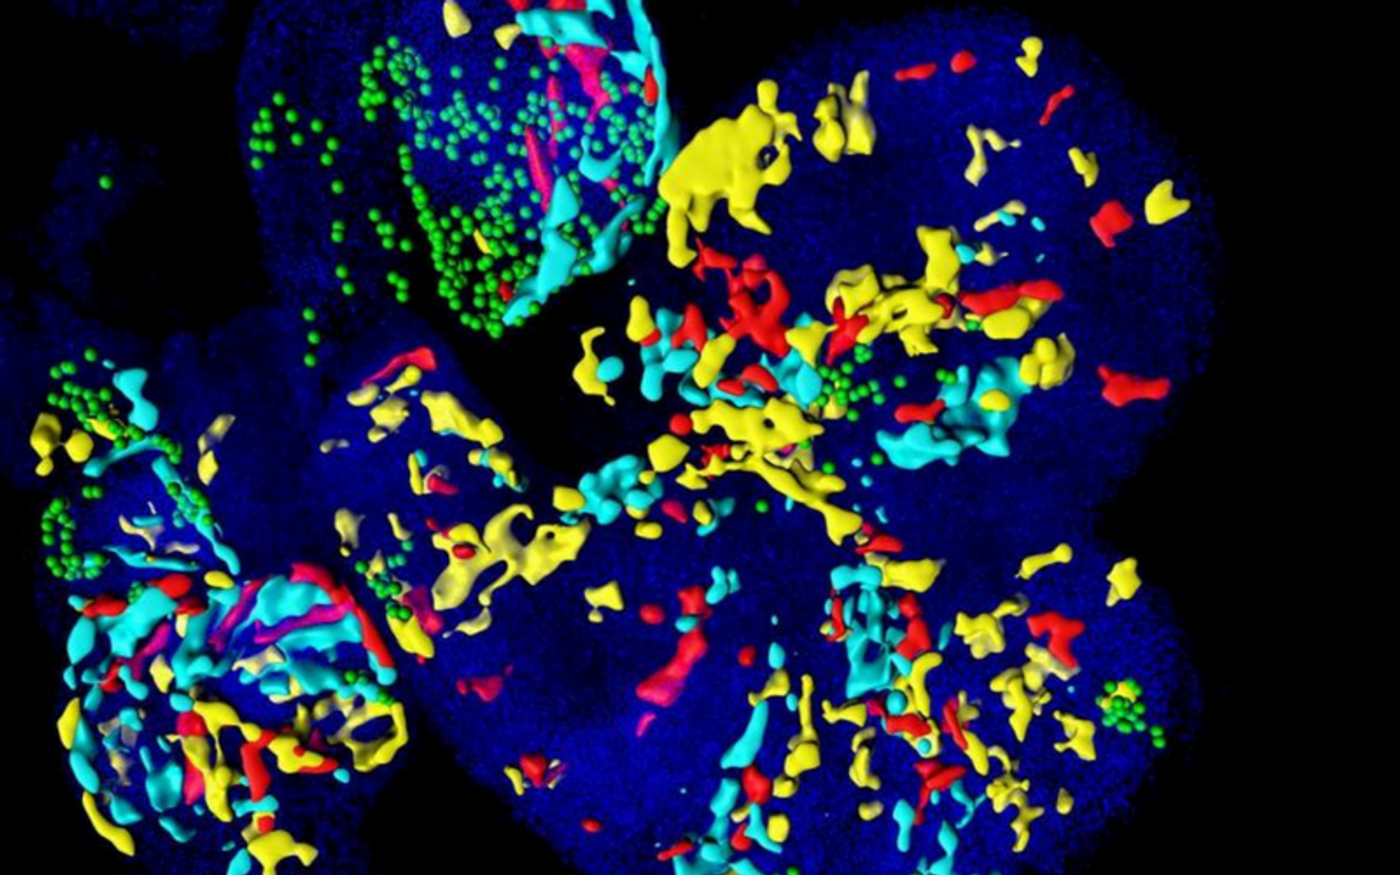 This is a mosaically labeled embryonic heart. Each colored patch is derived from the early labeling of a cardiac progenitor cell expressing the key gene Mesp1. Credit: Fabienne Lescroart